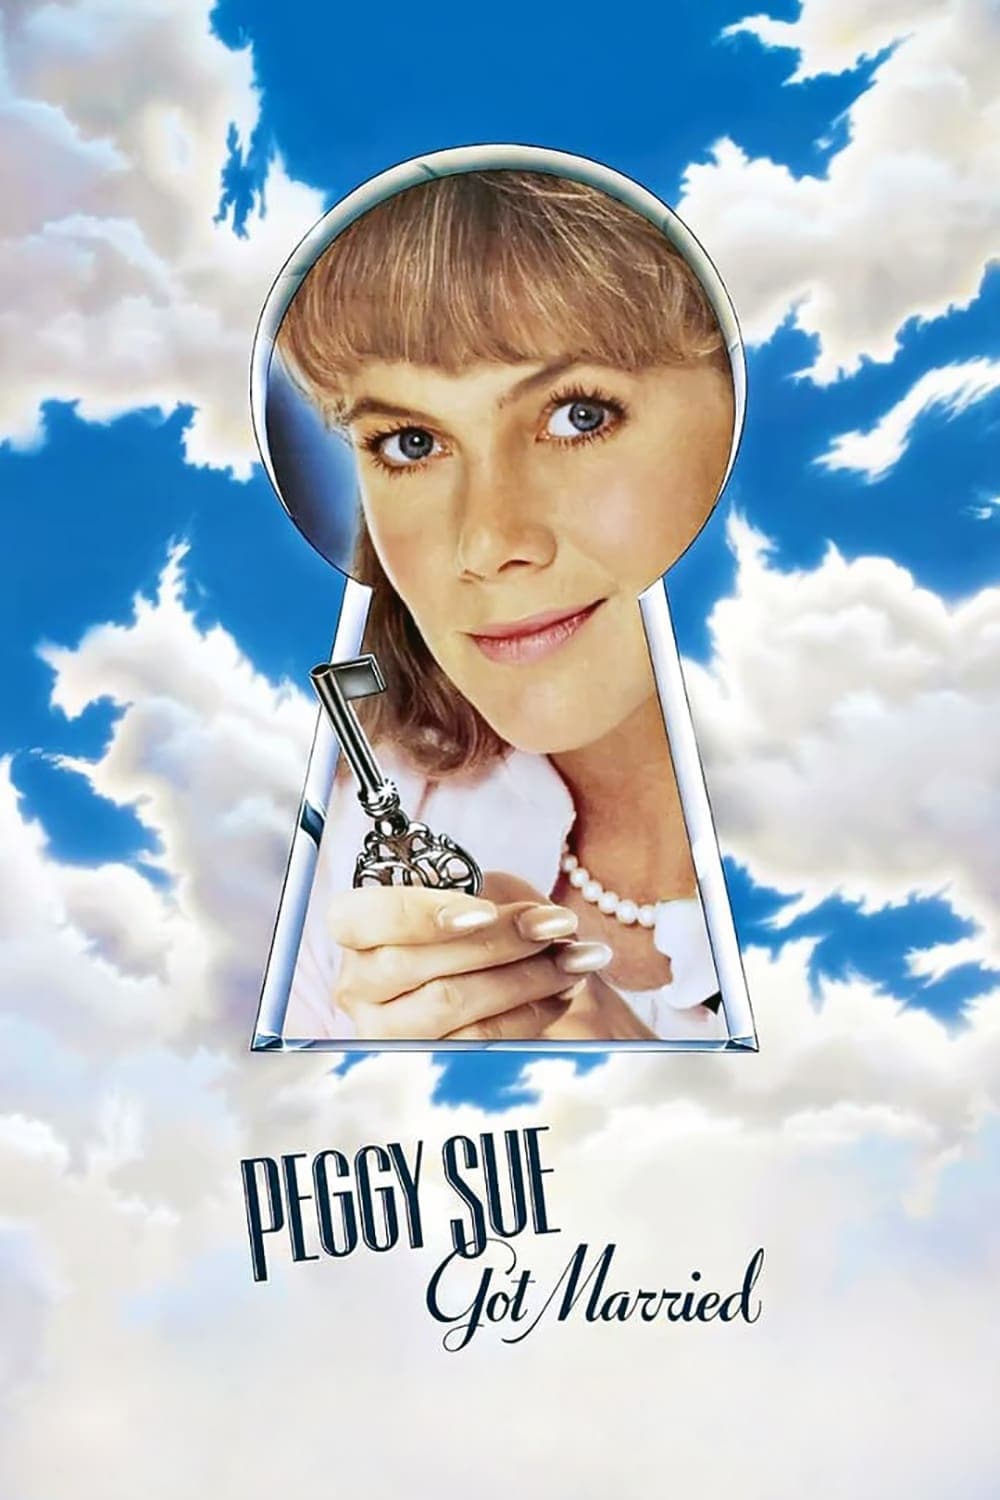 Peggy Sue Got Married (1986)